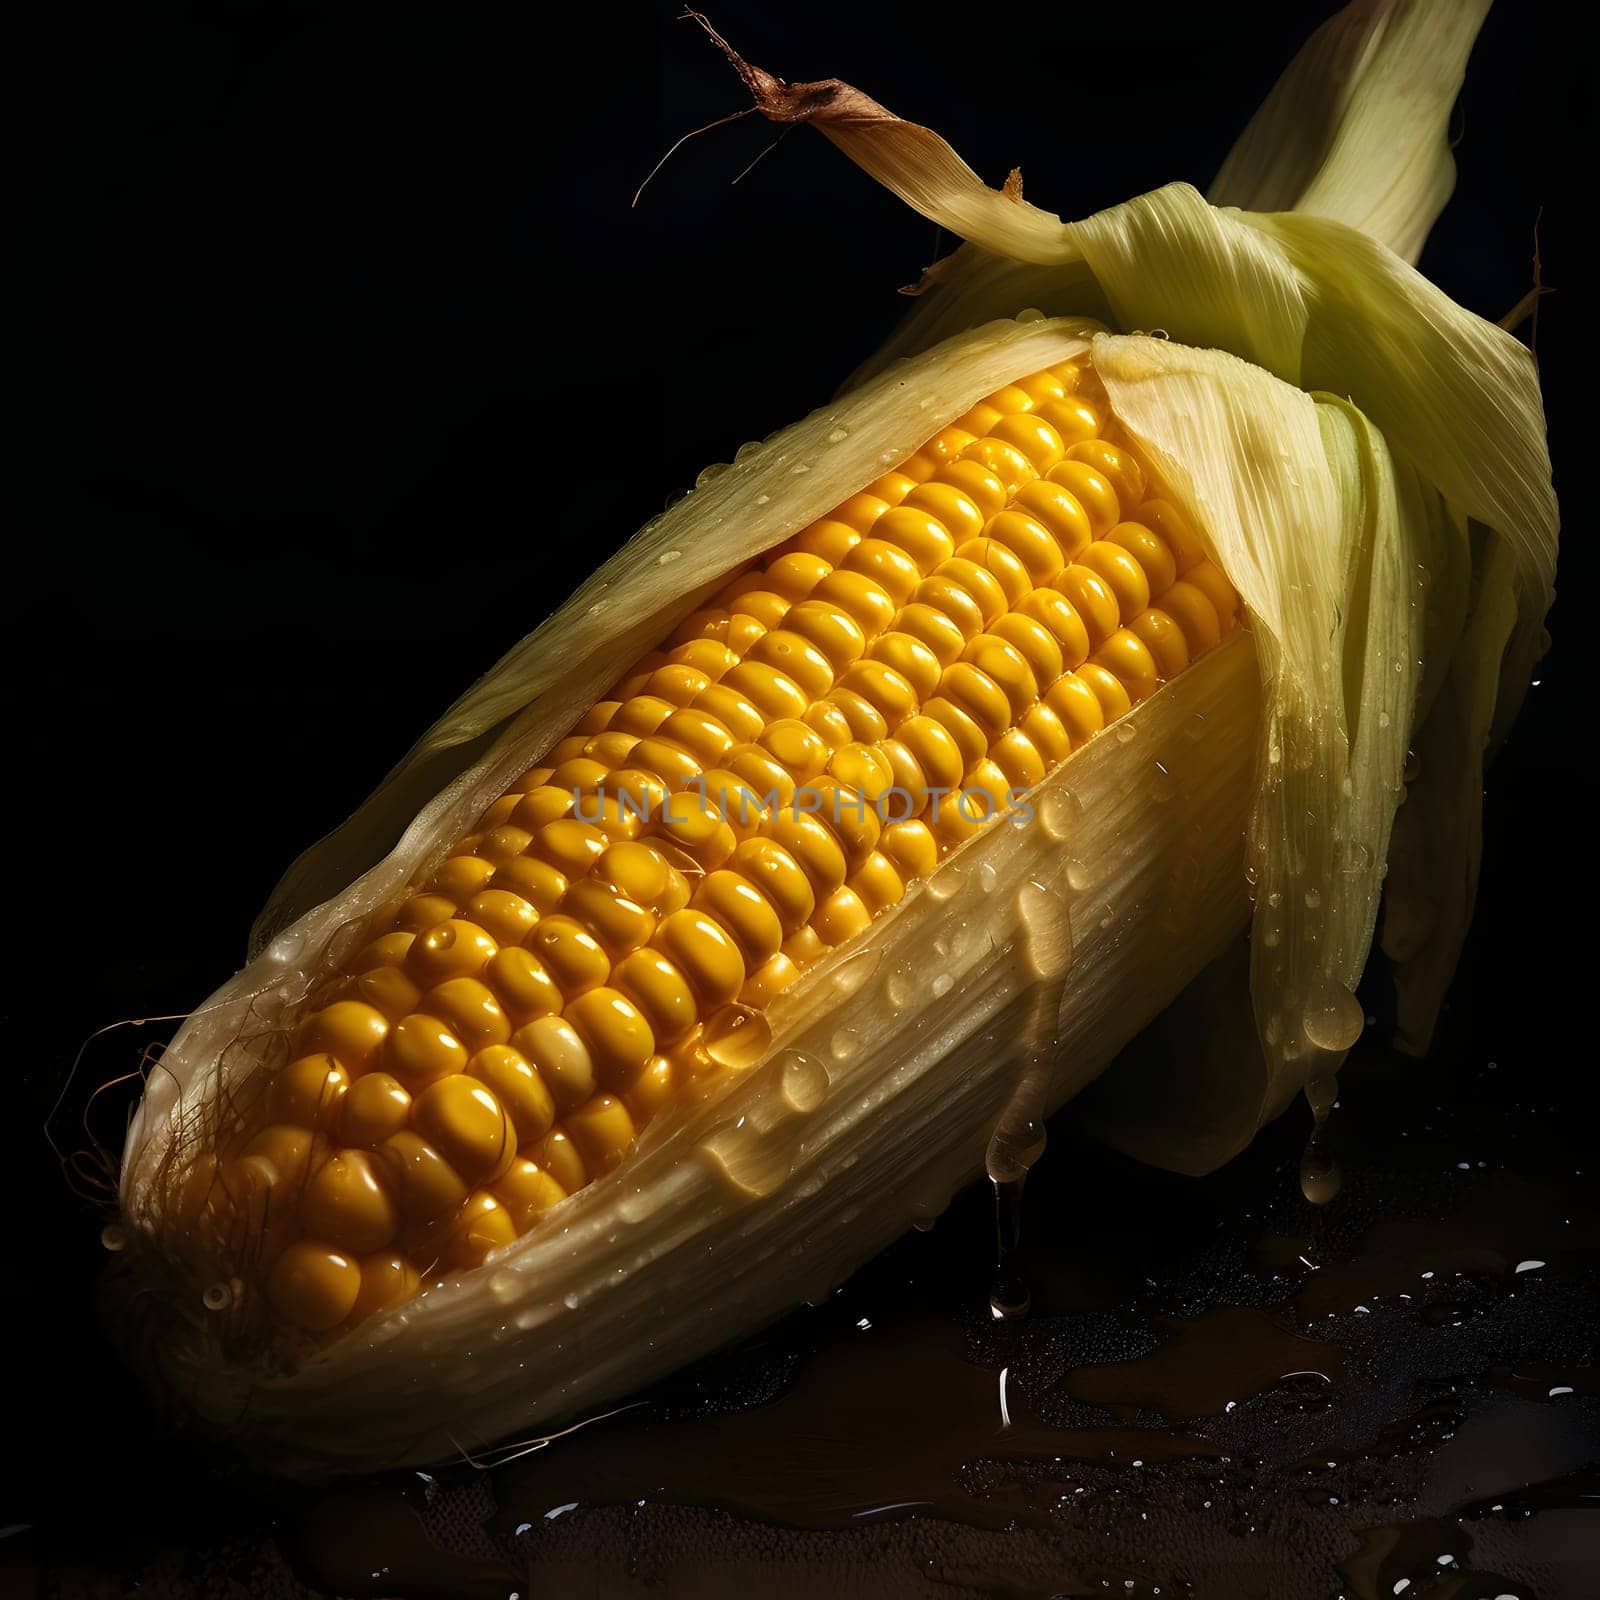 Yellow Corn Cob in Green Leaf, Dripping drops of water, dark background. Corn as a dish of thanksgiving for the harvest. by ThemesS